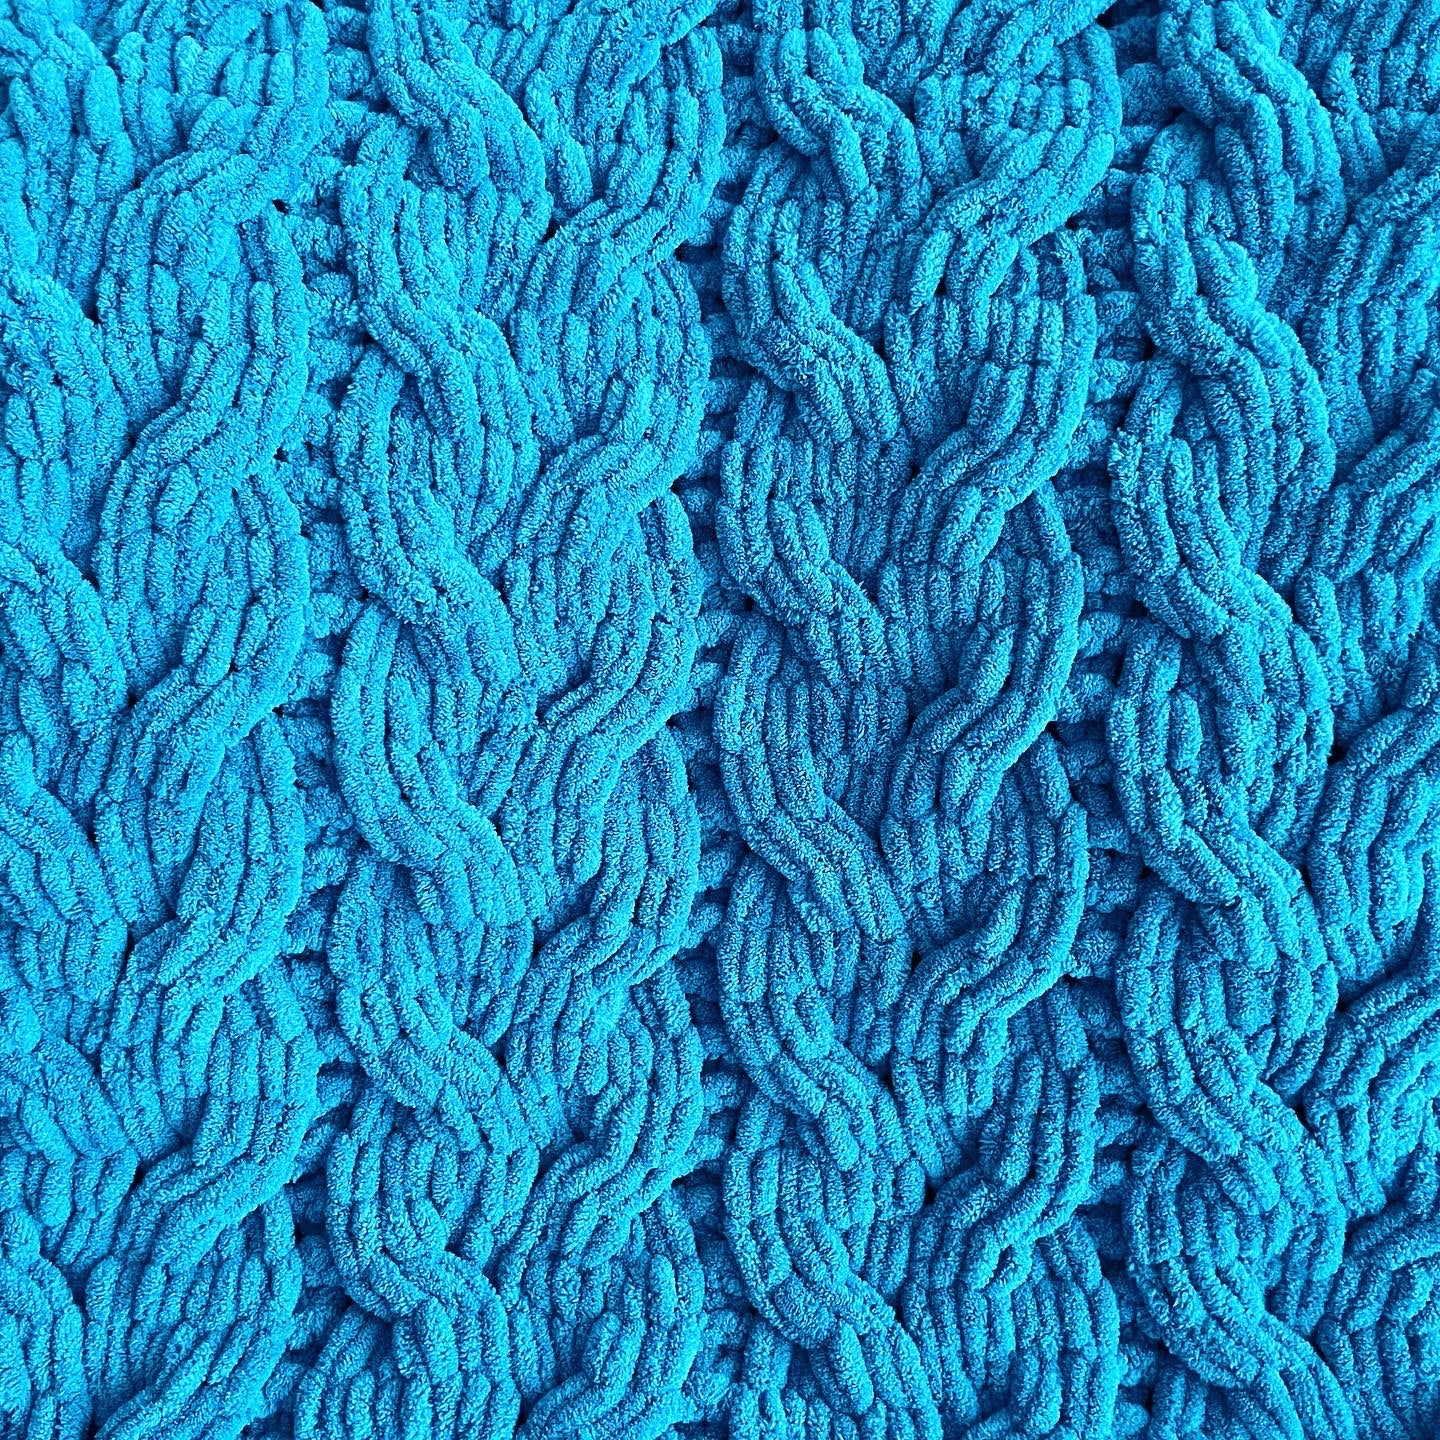 Crooked Cable Blanket - ILoveMyBlanket